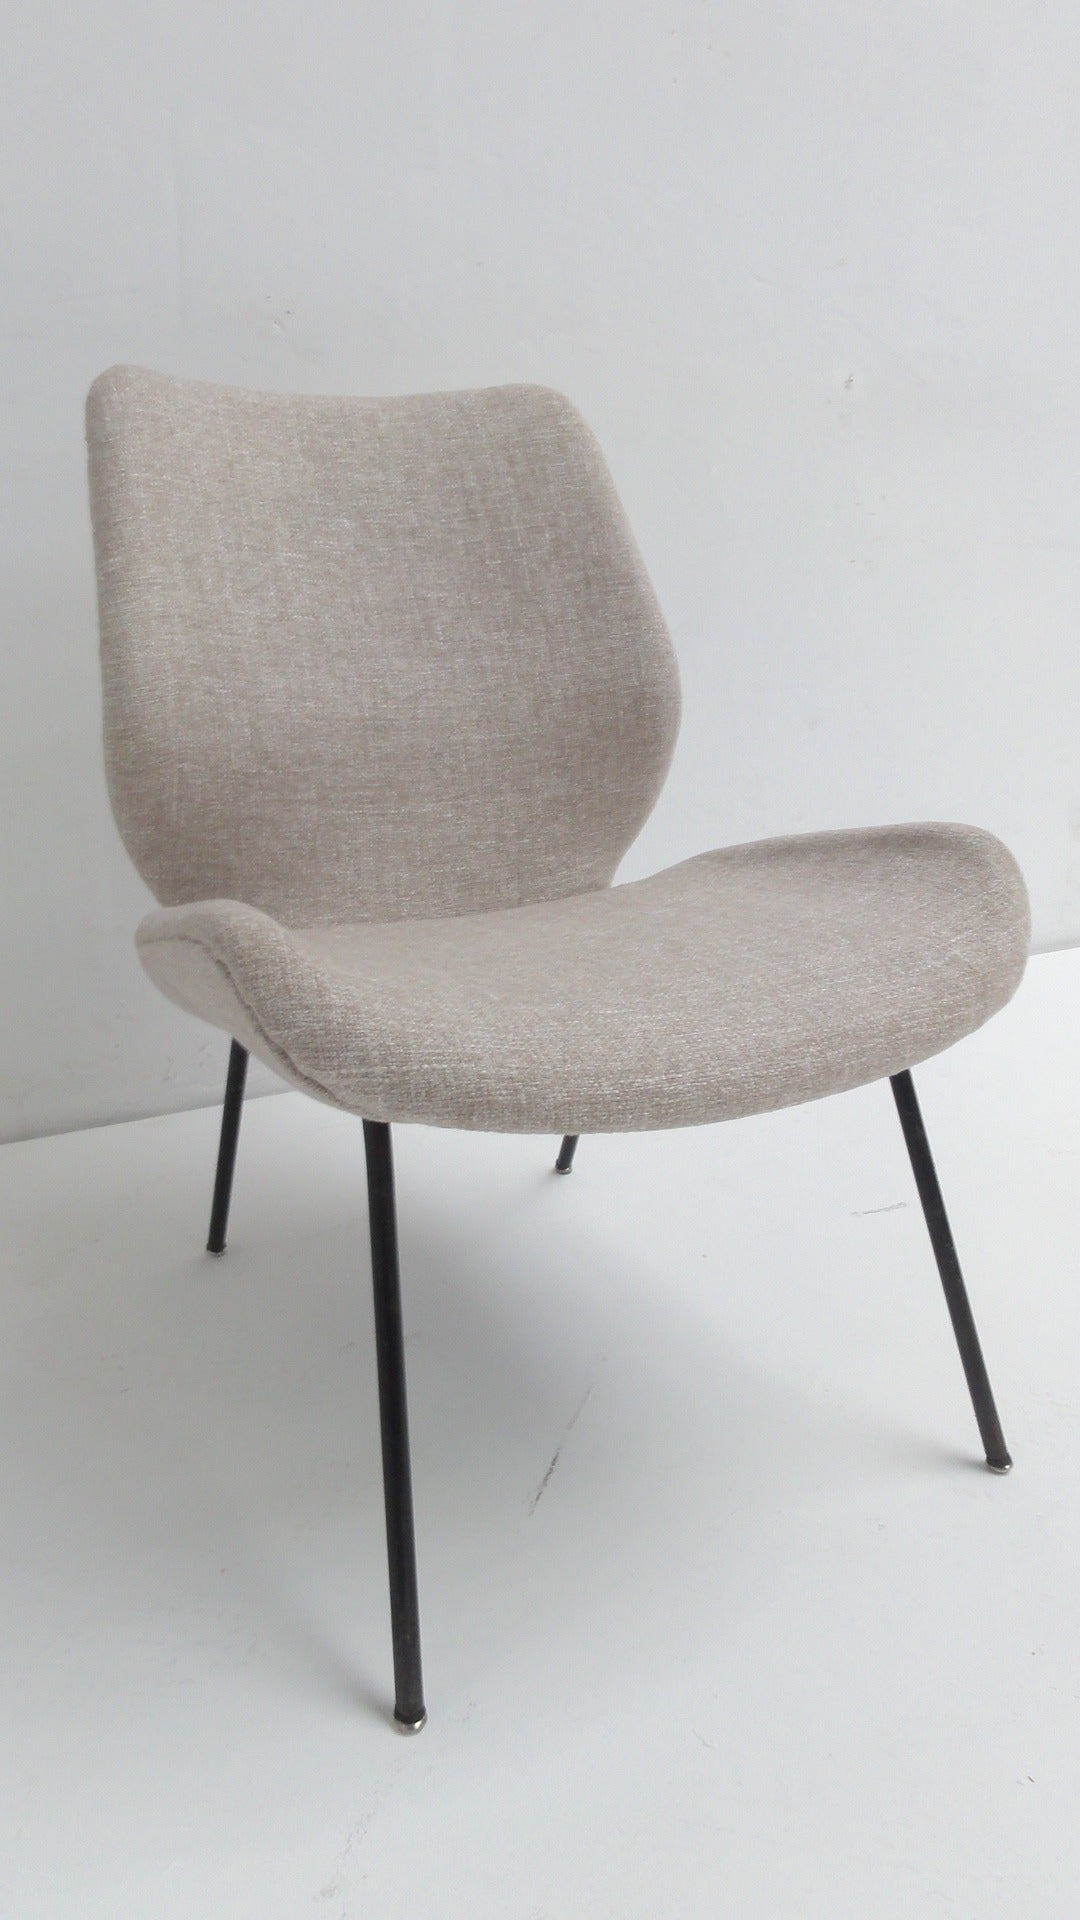 Elegant pair of 1950s Italian easy chairs attributed to Italian designer Gastone Rinaldi (1920-2006). Lovely subtle yet complex sculptural form finished in grey wool upholstery with typical Rinaldi style bent tubular form structure combined with